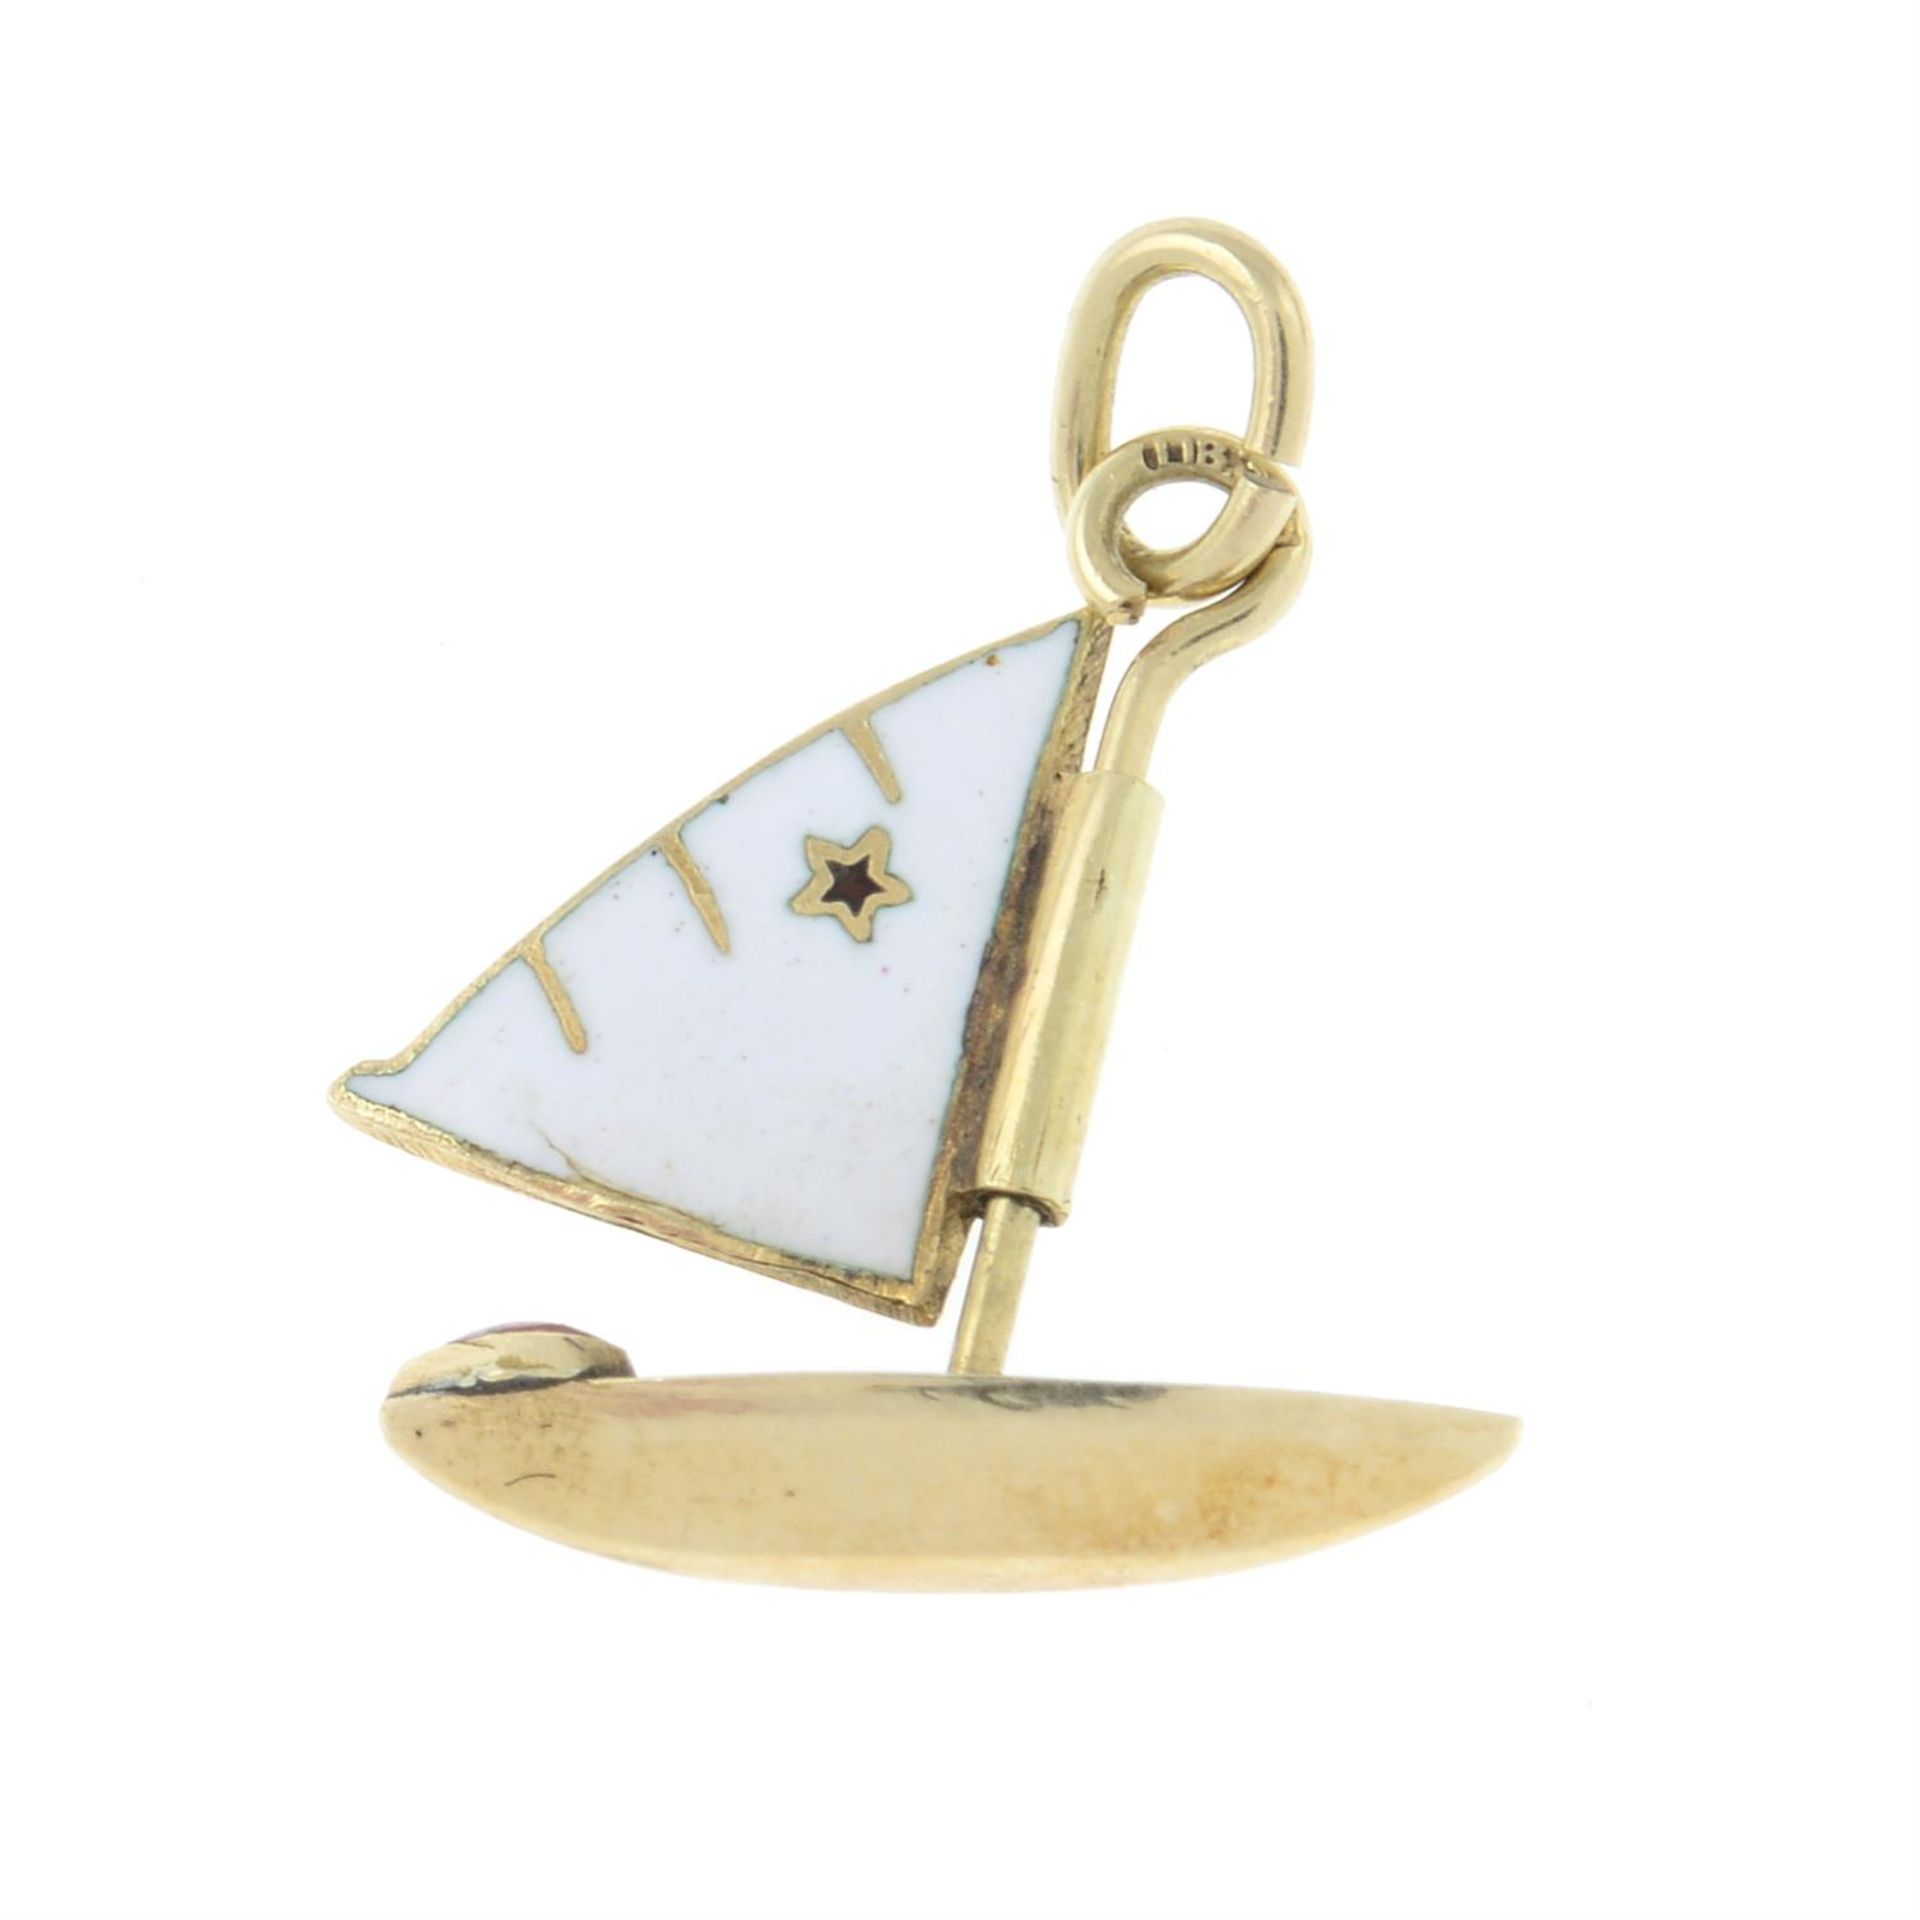 A mid 20th century gold sailing boat charm, with red enamel heart bow and white enamel sail.